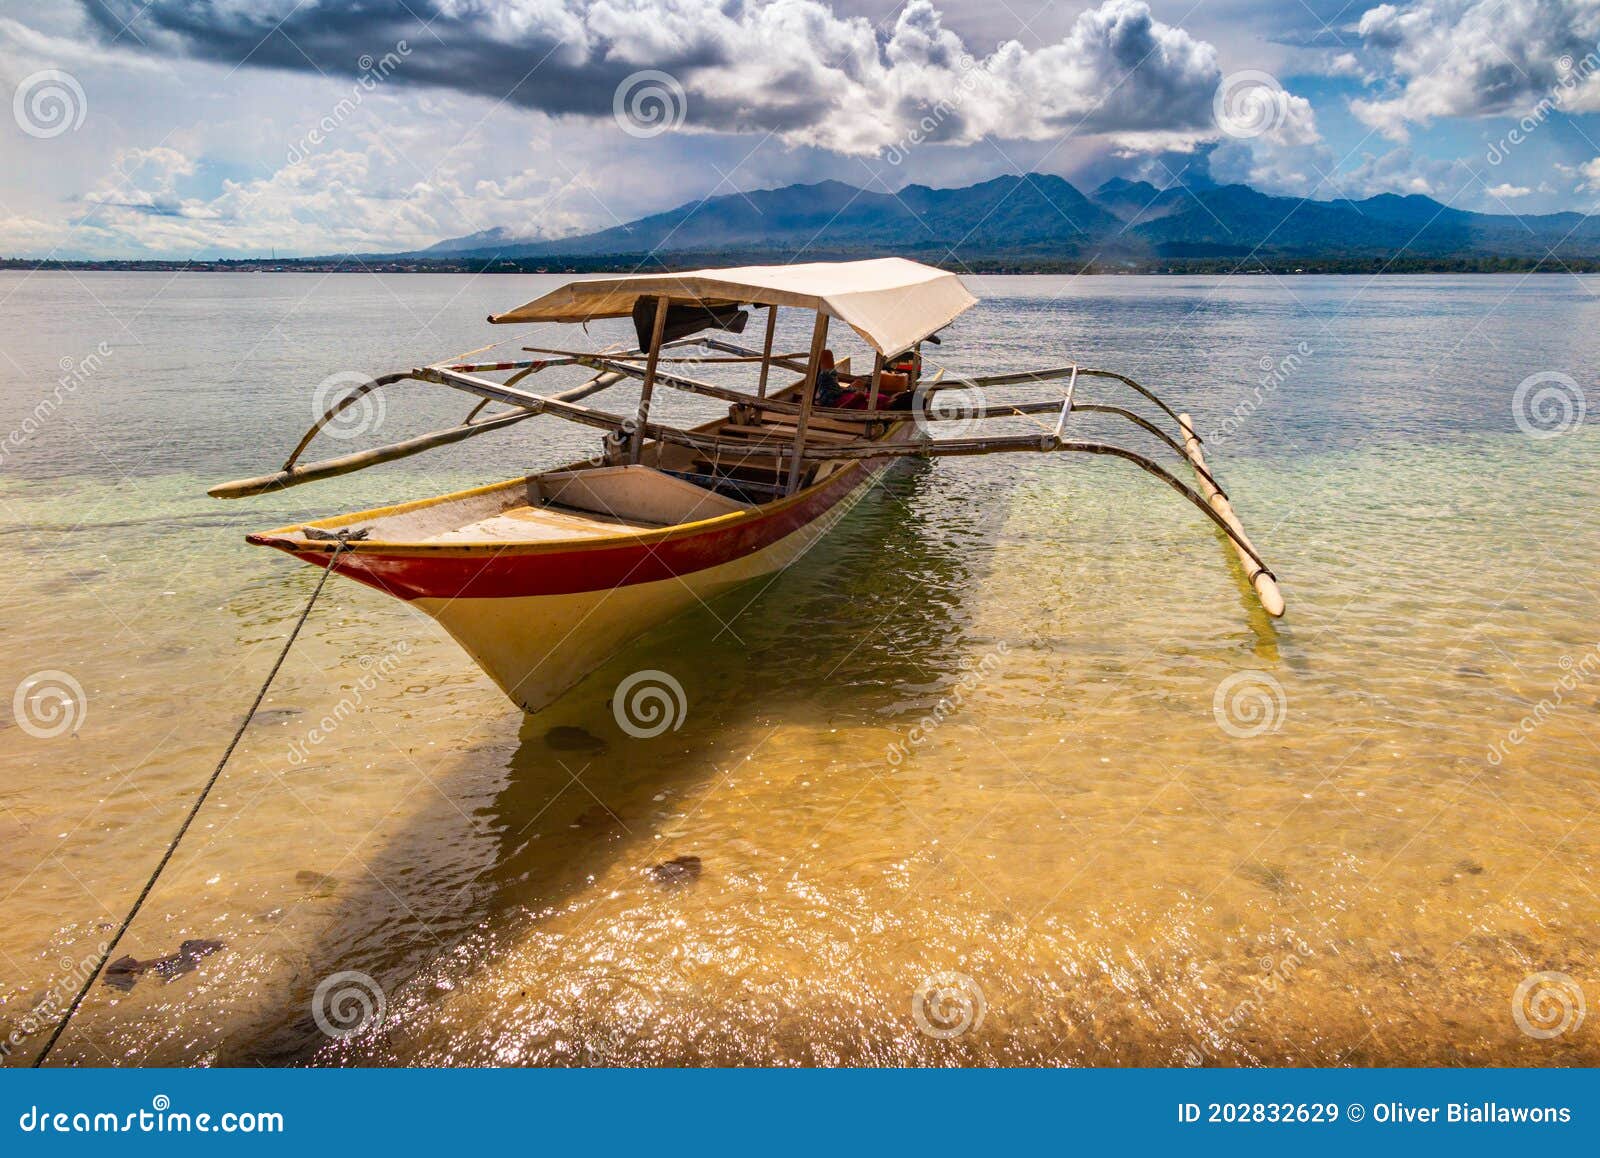 small boat on the green ocean with mountains in the background, maluku, indonesia